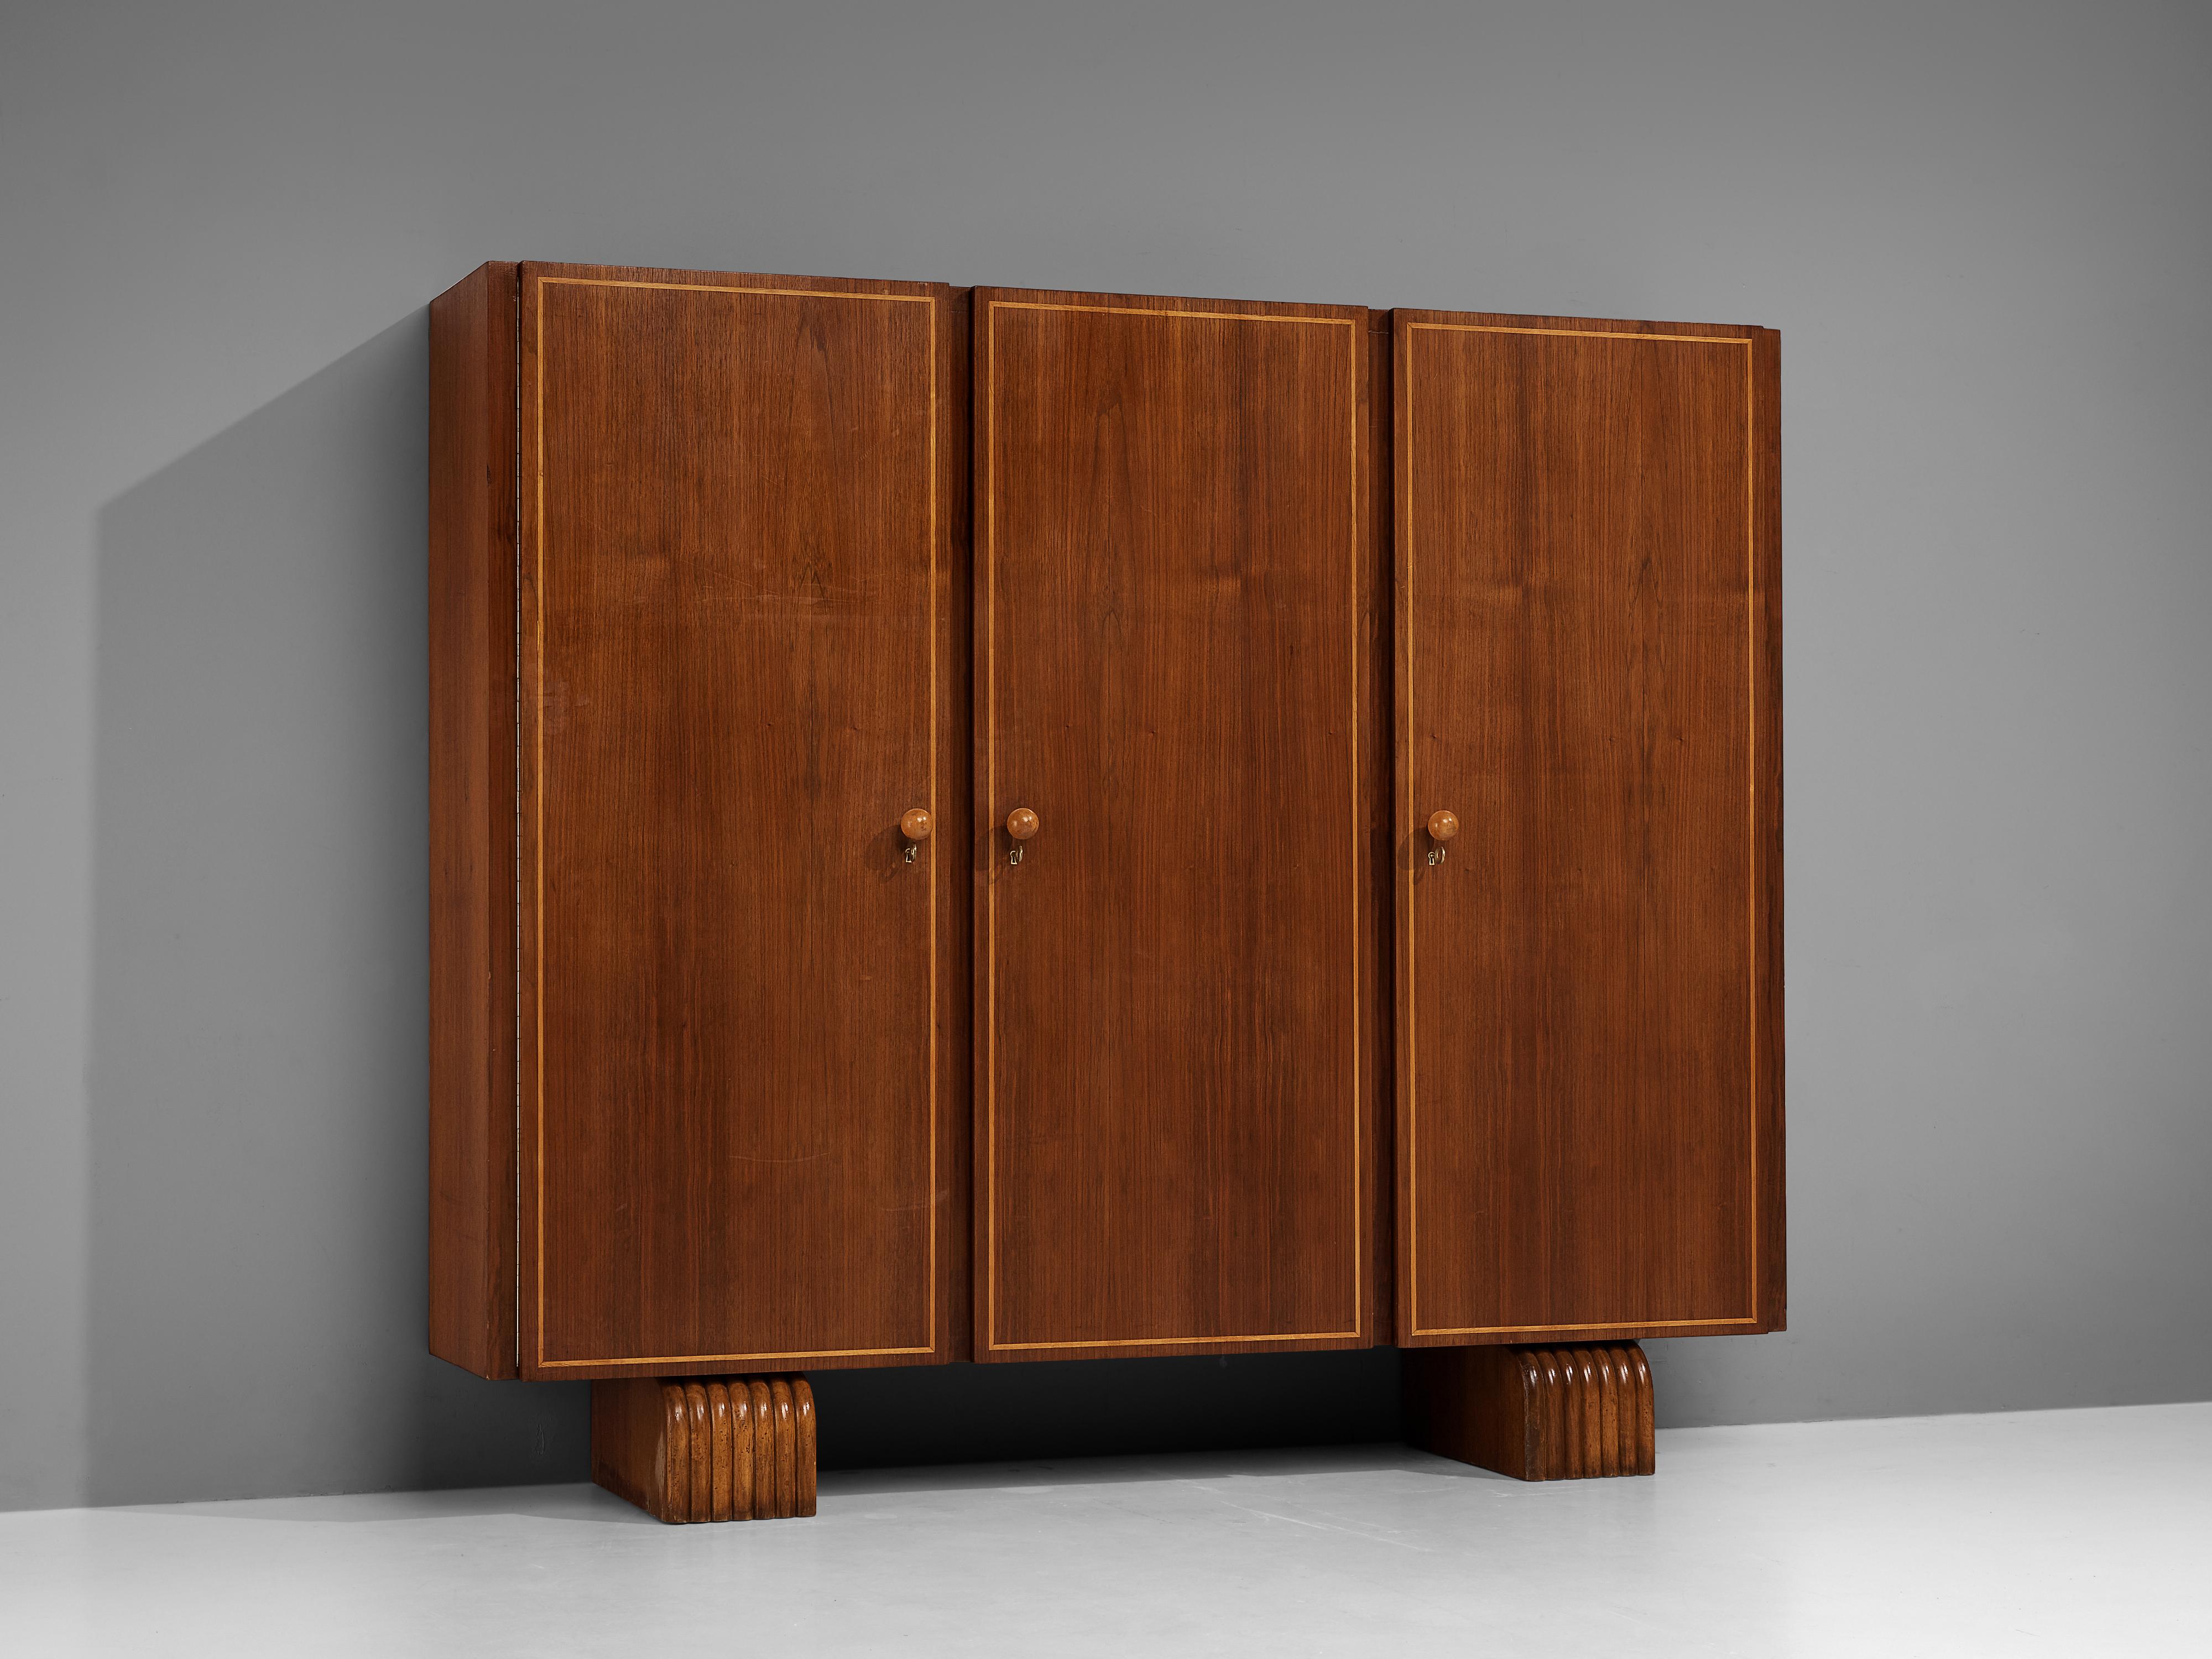 Italian wardrobe, walnut, maple, Italy, 1940s 

This elegant wardrobe executed in walnut and maple is designed in the manner of the widely celebrated Italian designer Gio Ponti (1891-1979). With three doors, and a middle compartment containing